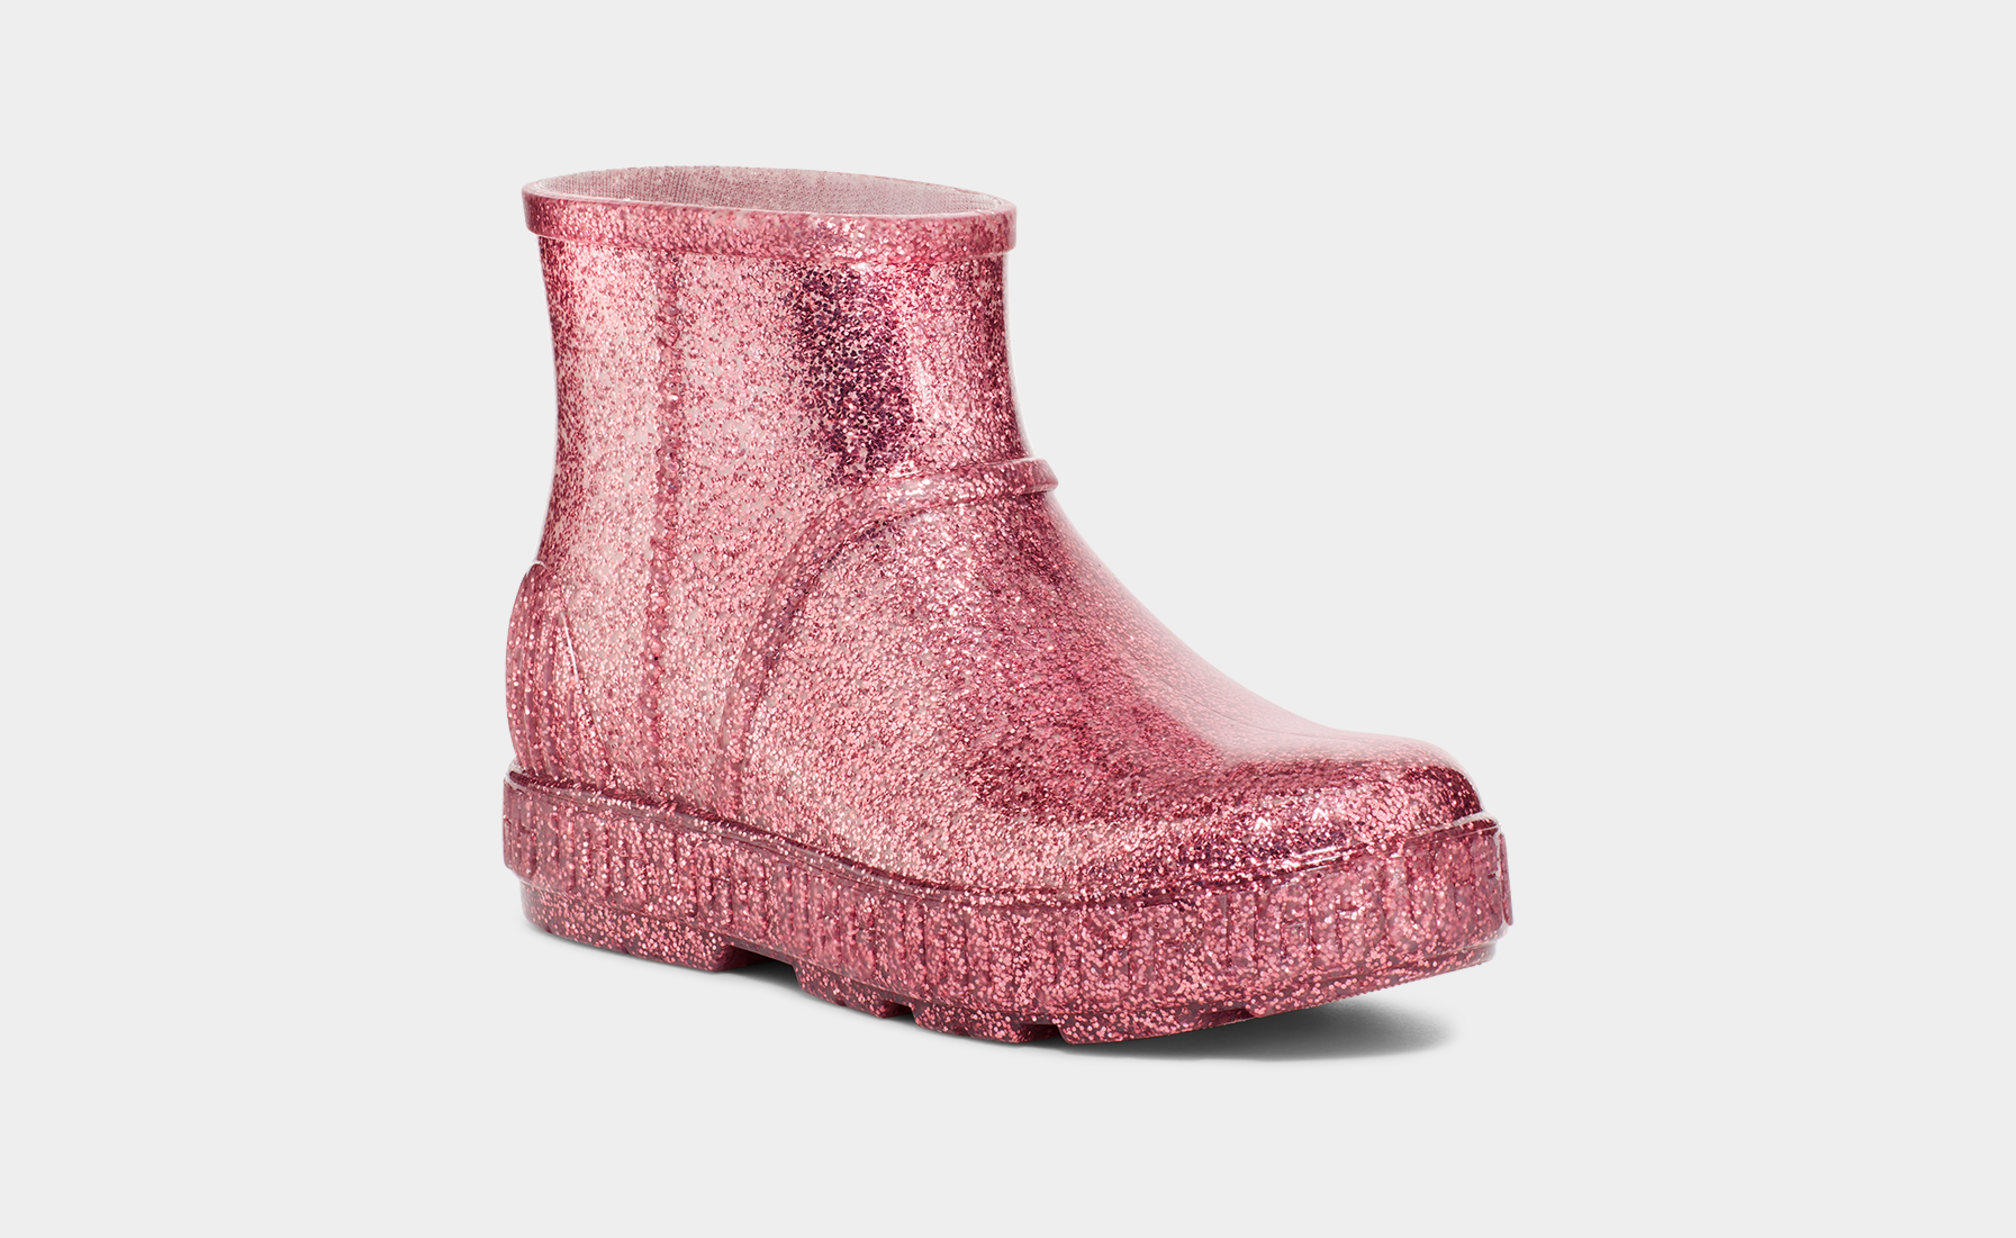 UGG Classic Short Pink Sparkles Sequin Sheepskin Boots Size US 7 Womens